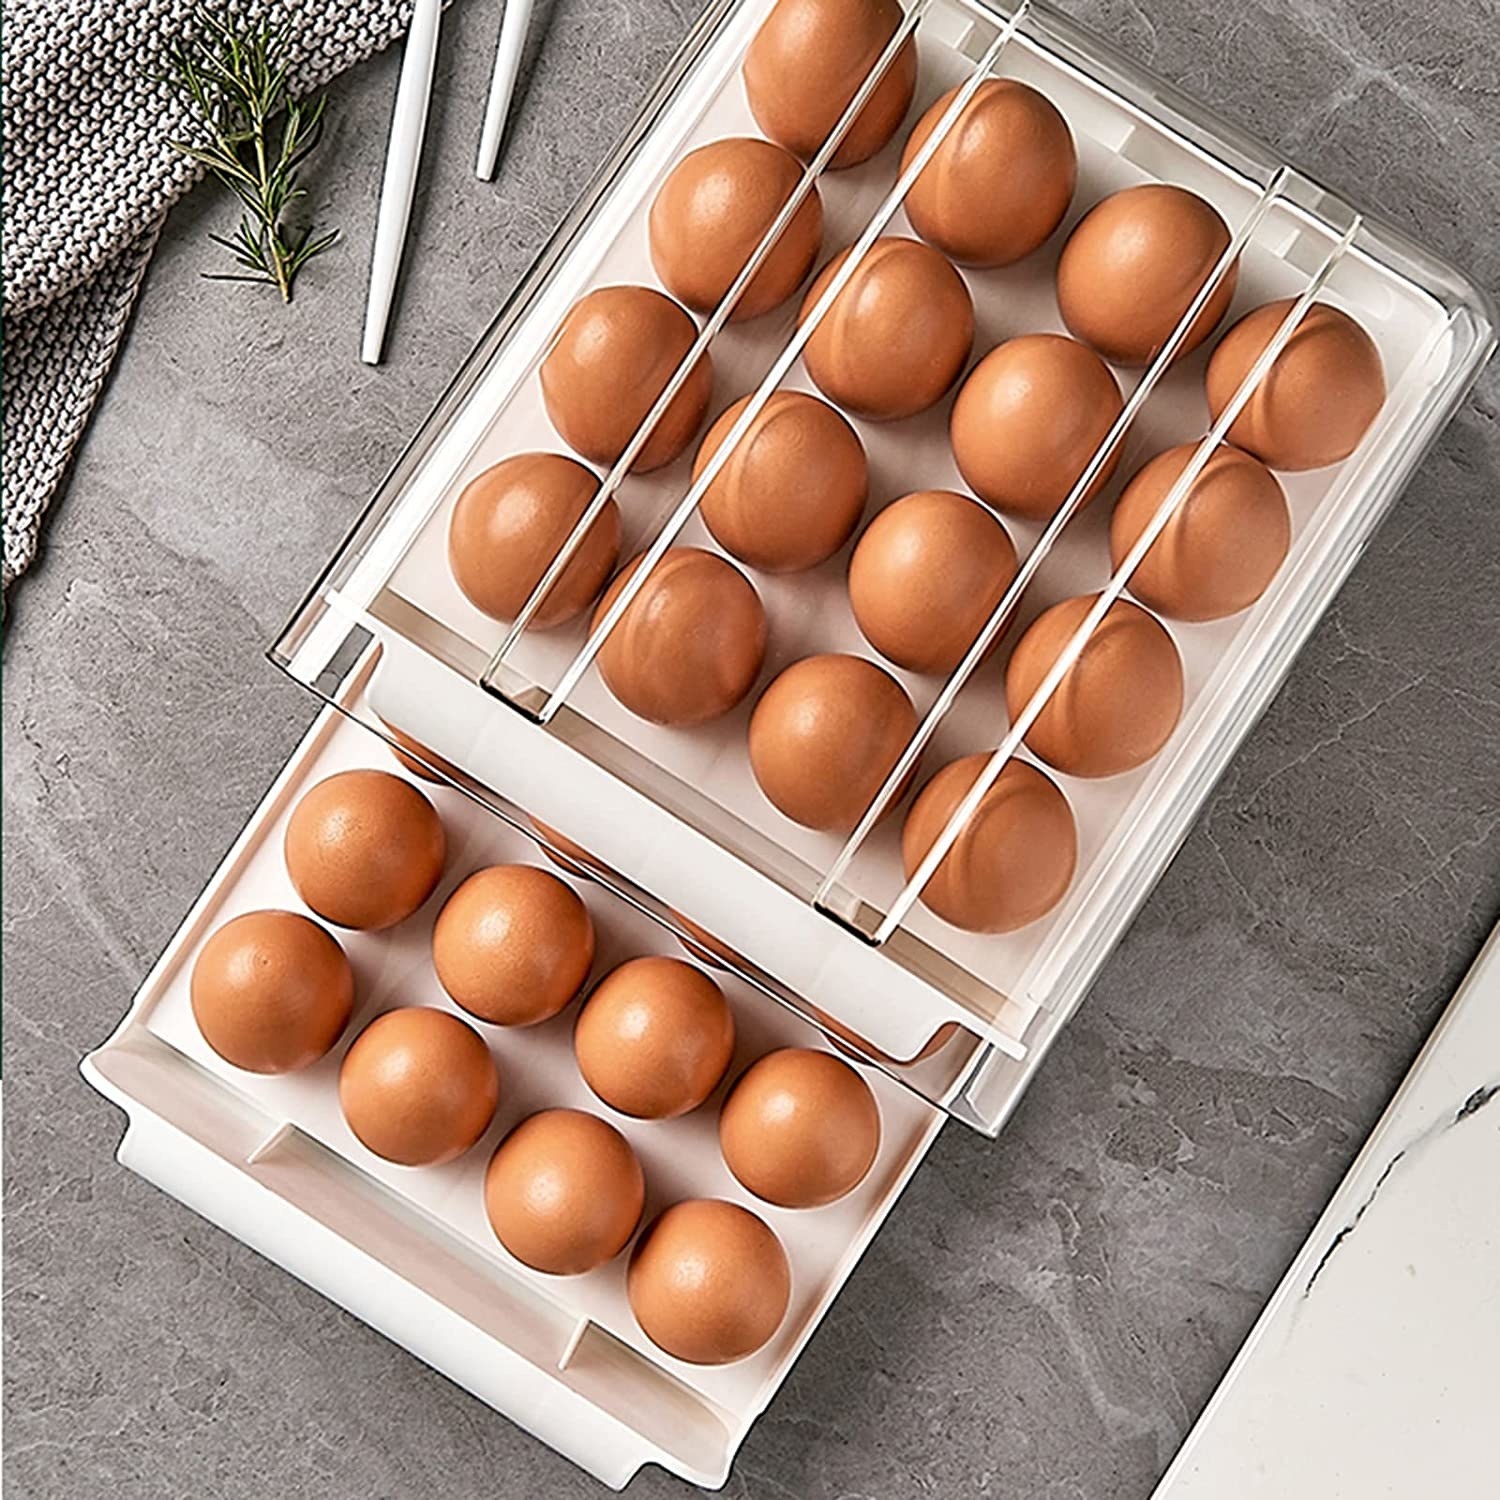 eggs stacked in a sleek two-tiered egg tray